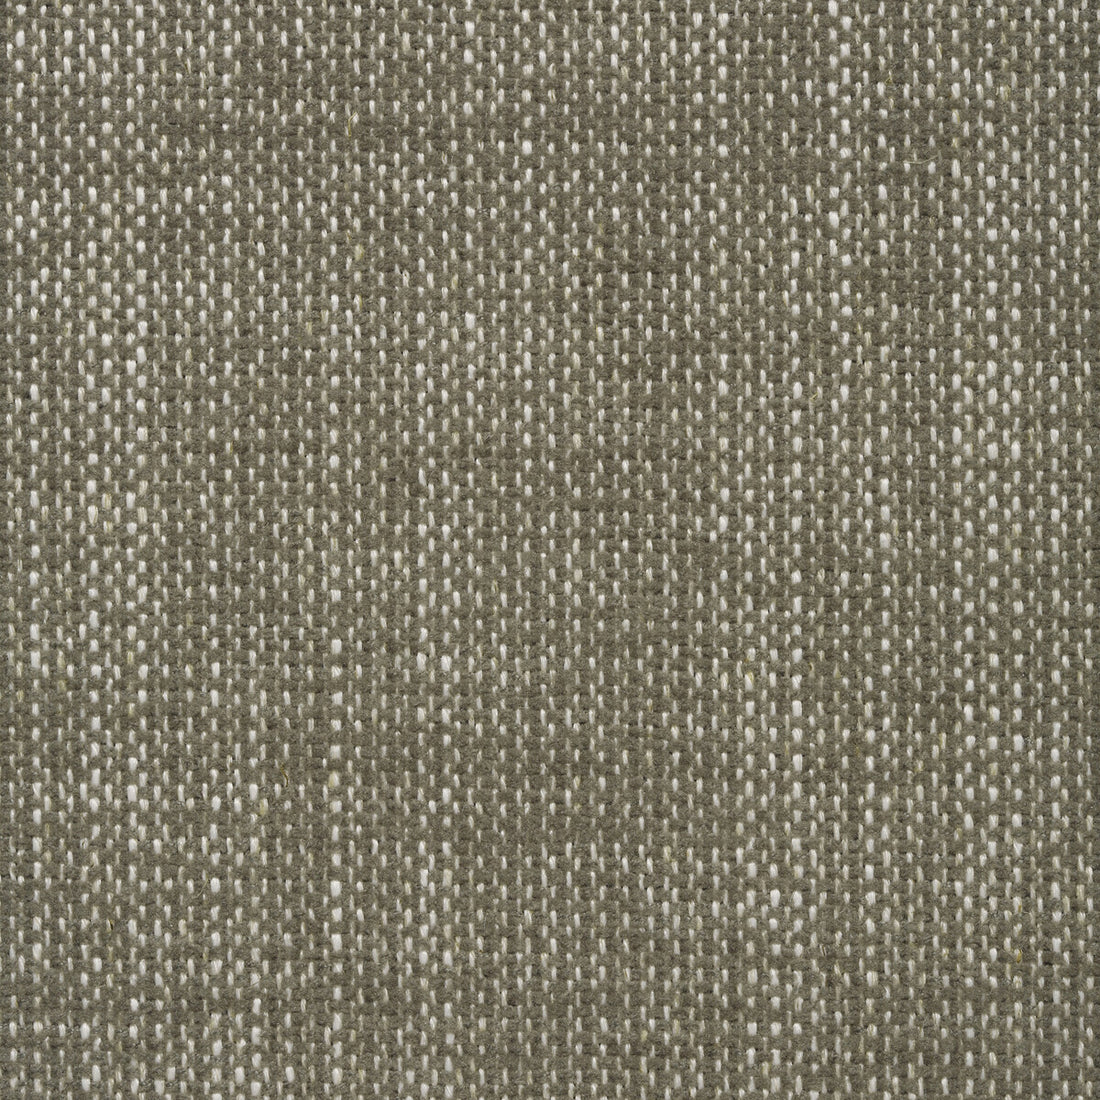 Kravet Smart fabric in 35111-106 color - pattern 35111.106.0 - by Kravet Smart in the Performance Crypton Home collection